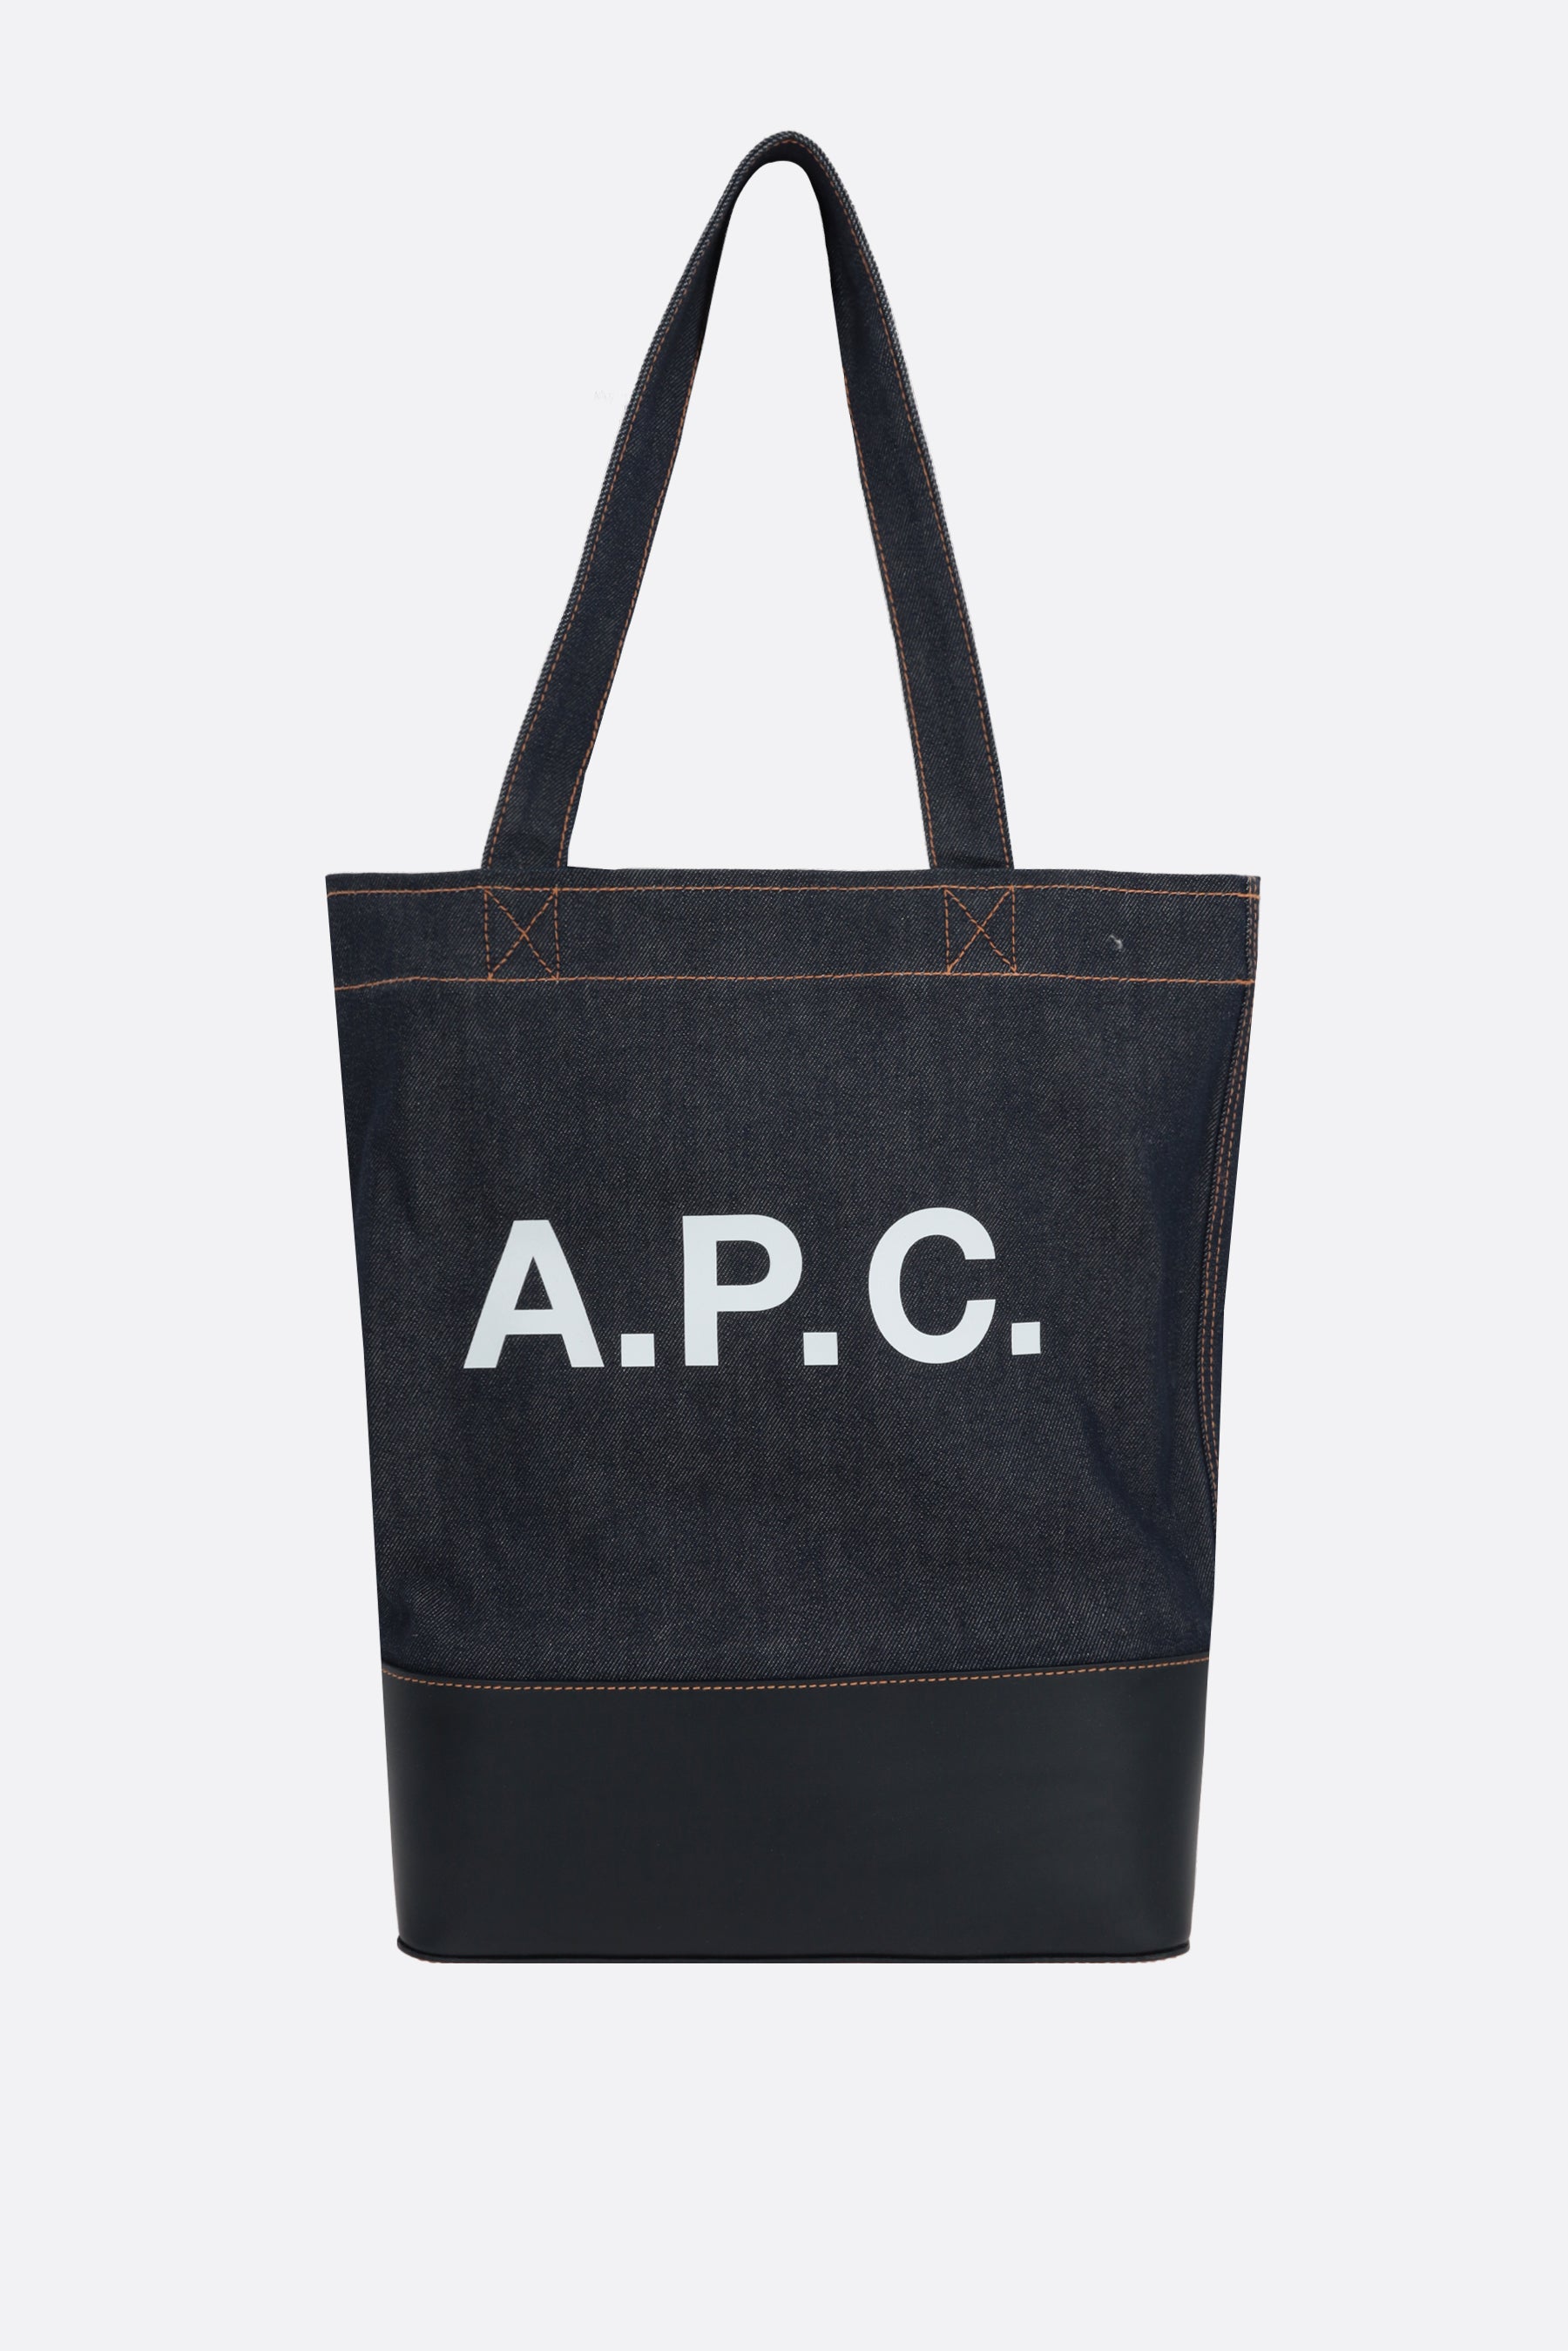 Axelle denim and smooth leather tote bag